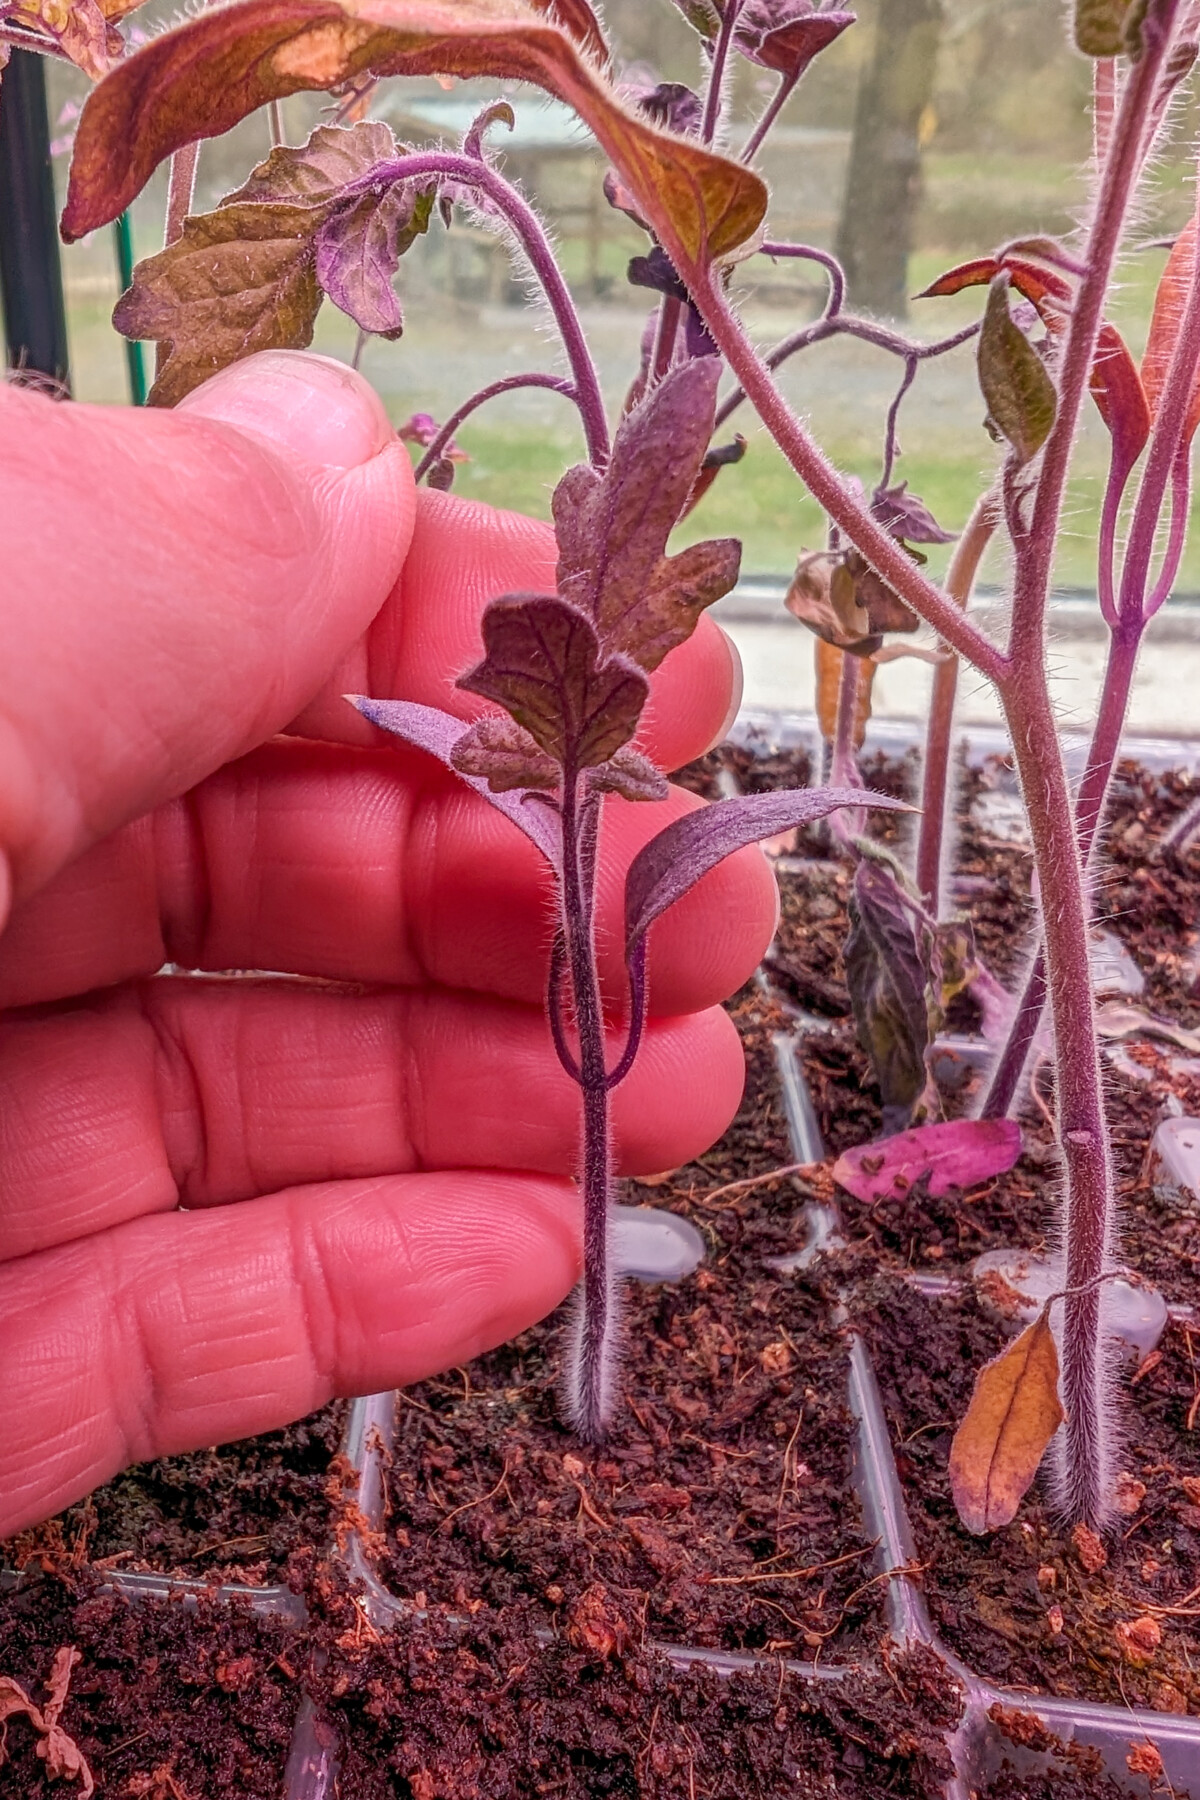 Fingers supporting a small tomato seedling that has turned purple due to a nutrient deficiency.